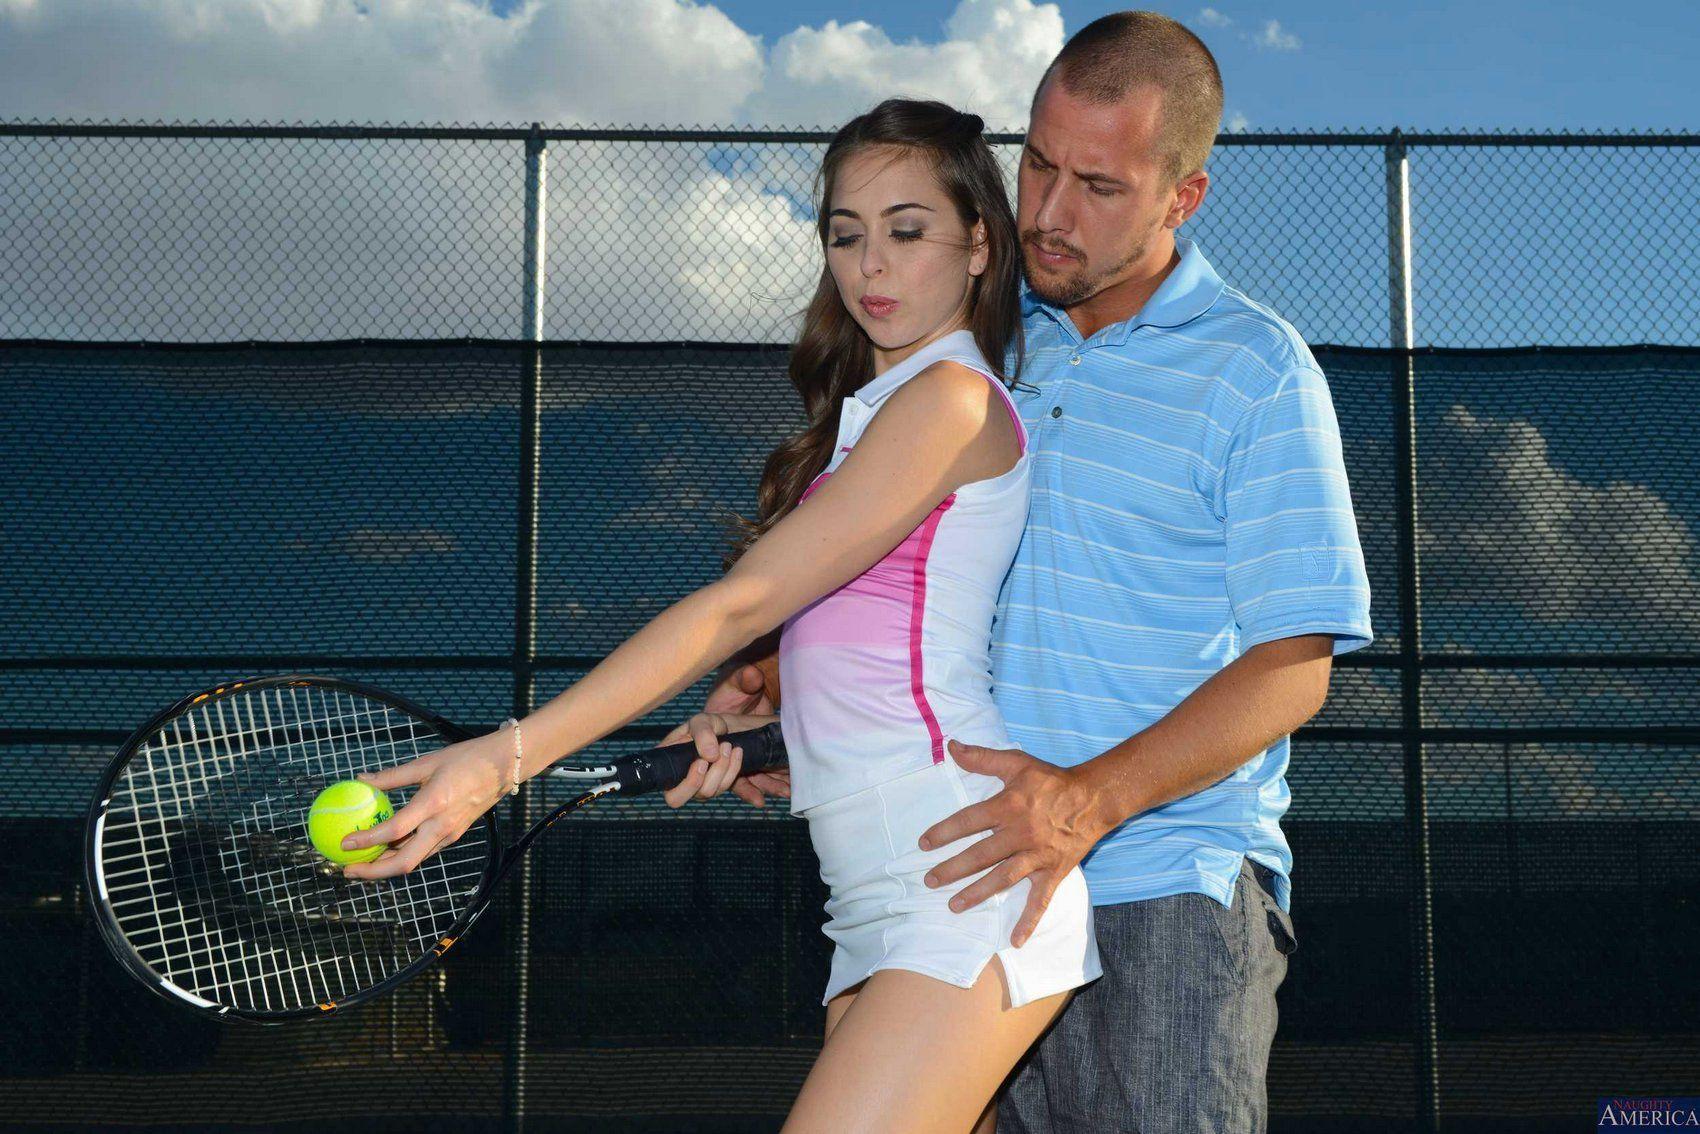 Having sex with tennis player photo